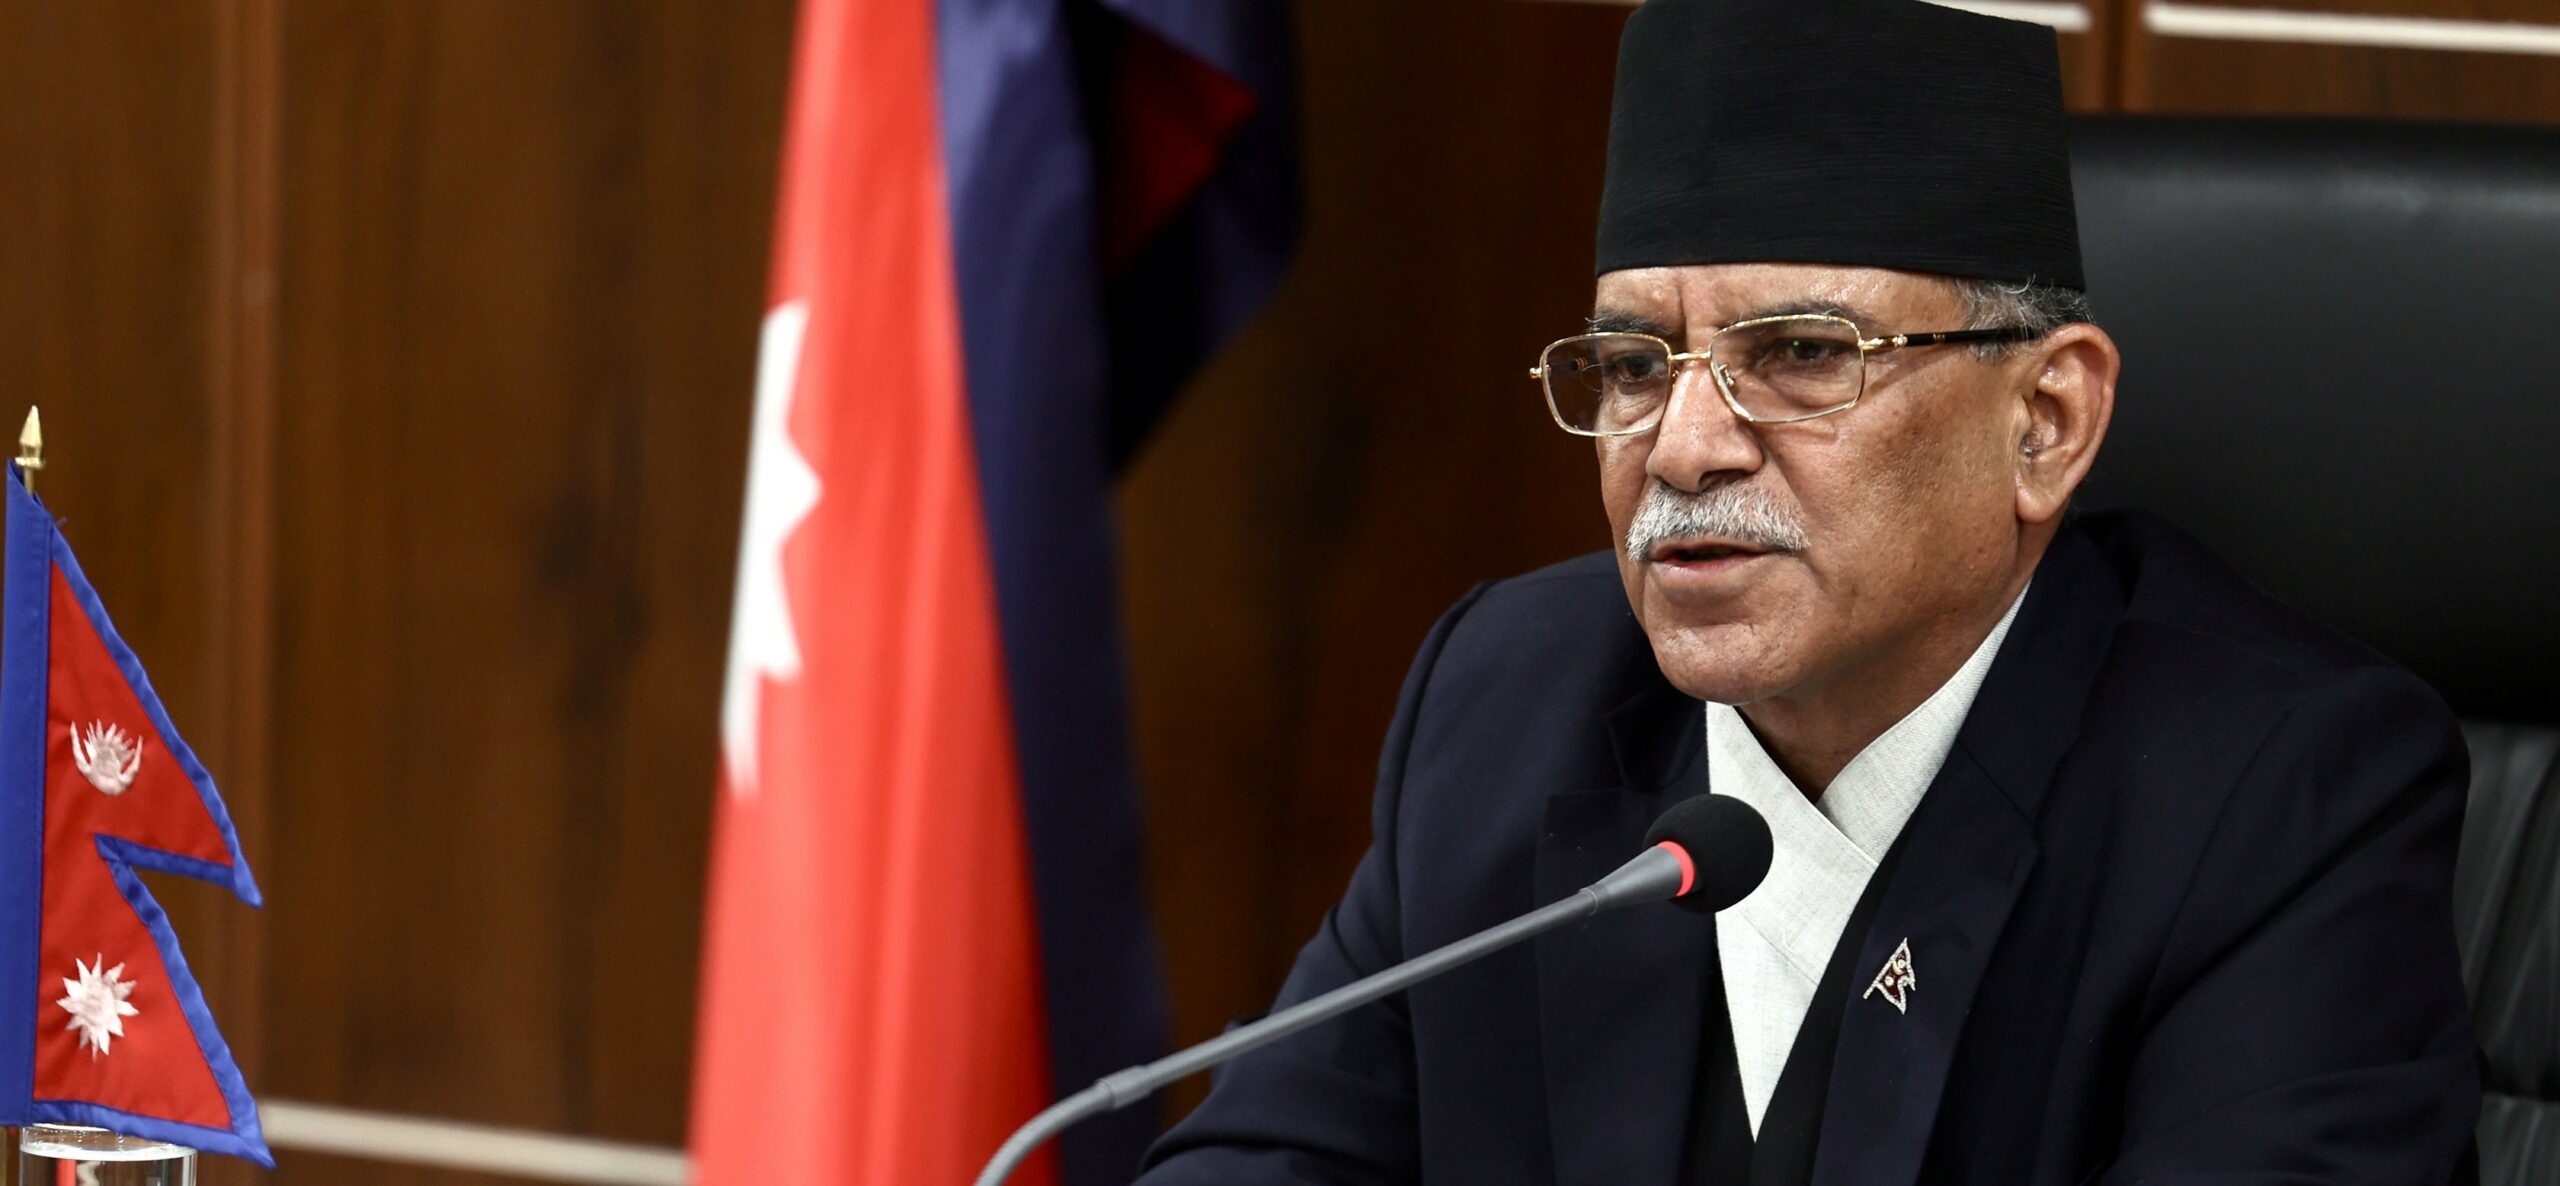 PM Dahal calls meeting of Constitutional Council